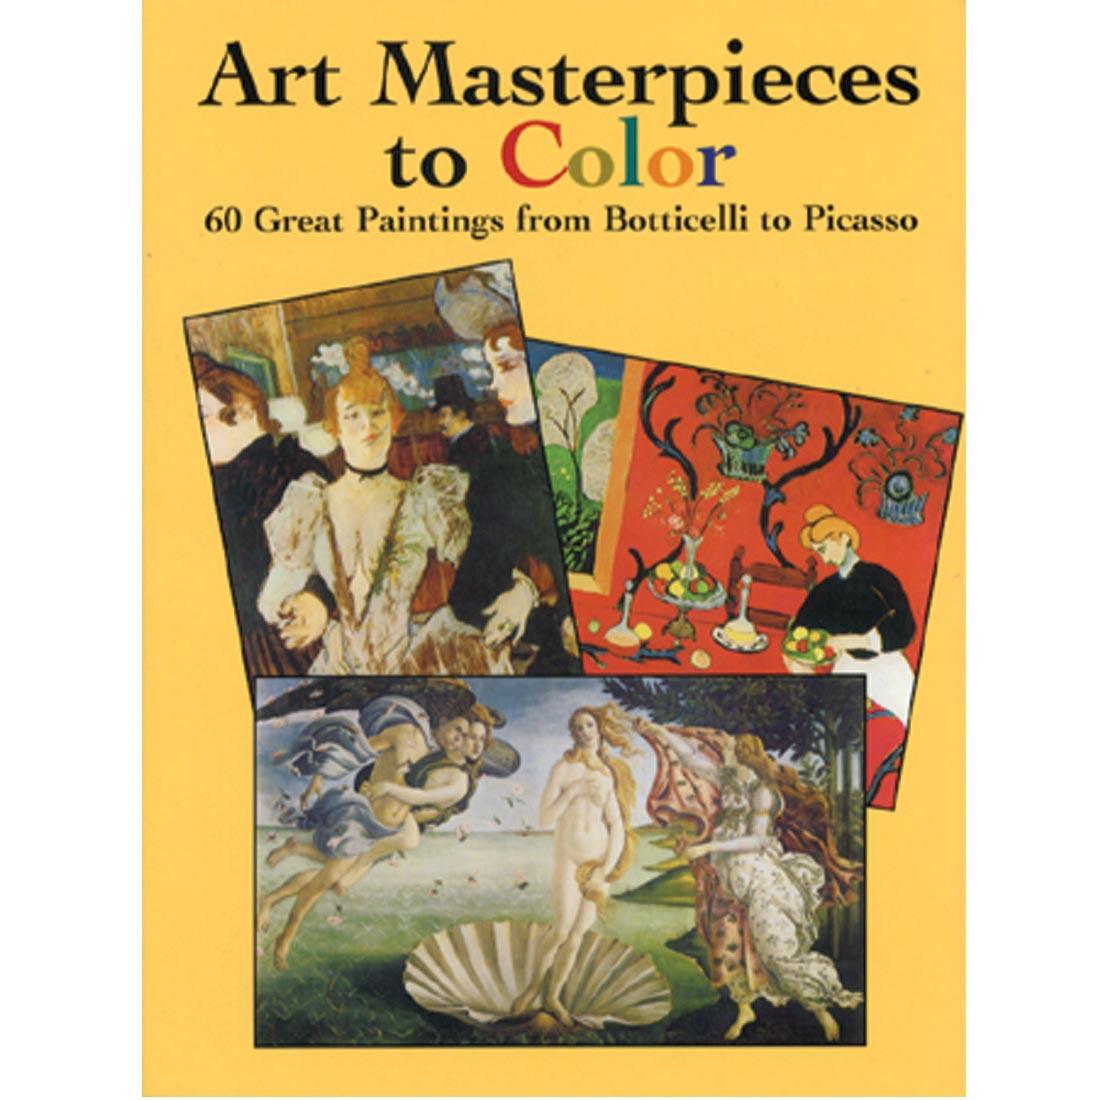 Art Masterpieces To Color 60 Great Paintings from Botticelli to Picasso